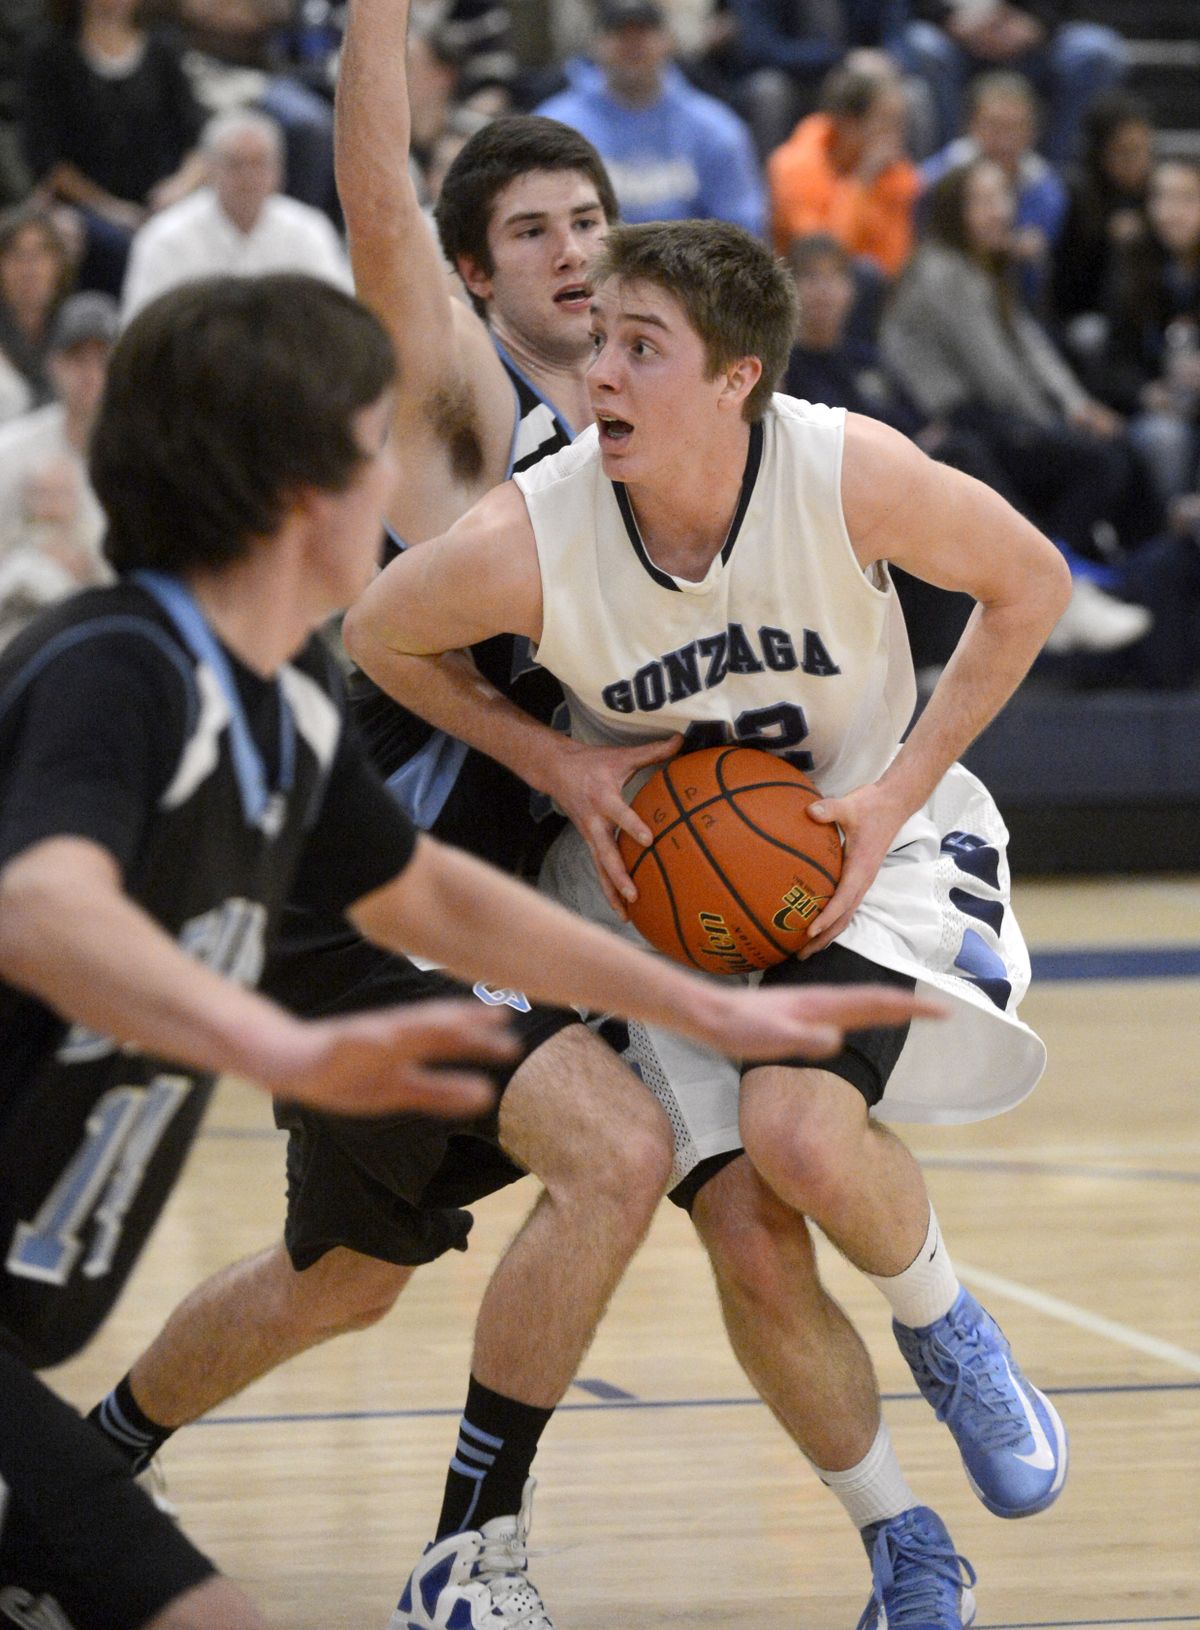 Gonzaga Prep’s Jake Groh breaks toward the basket on a night he scored a career-high 25 points. (Colin Mulvany)